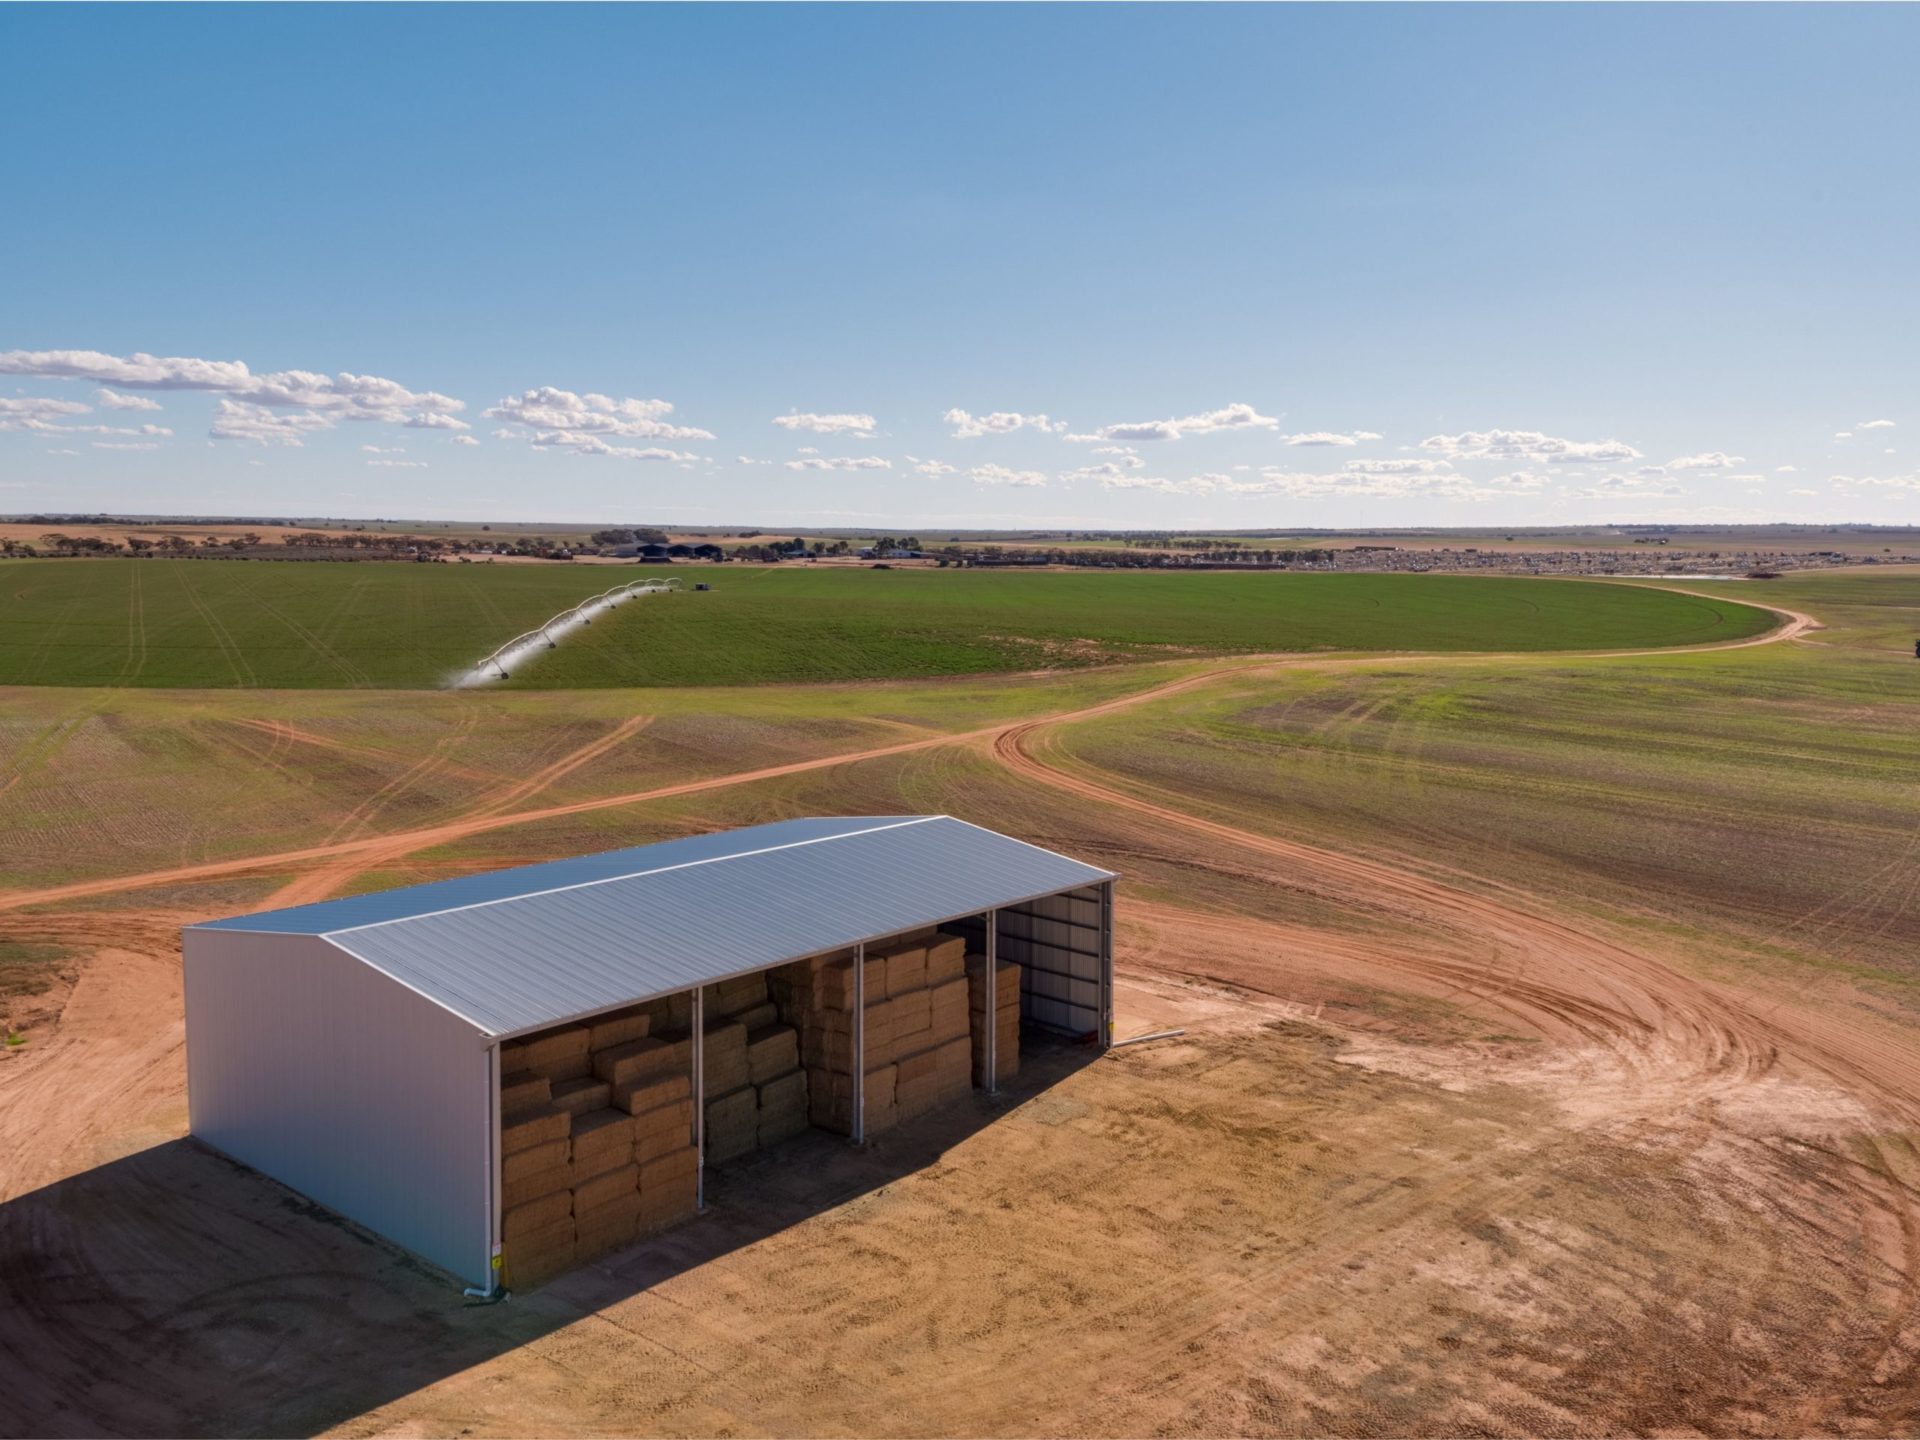 You are currently viewing 32m x 21m x 8.25m open-front hay shed